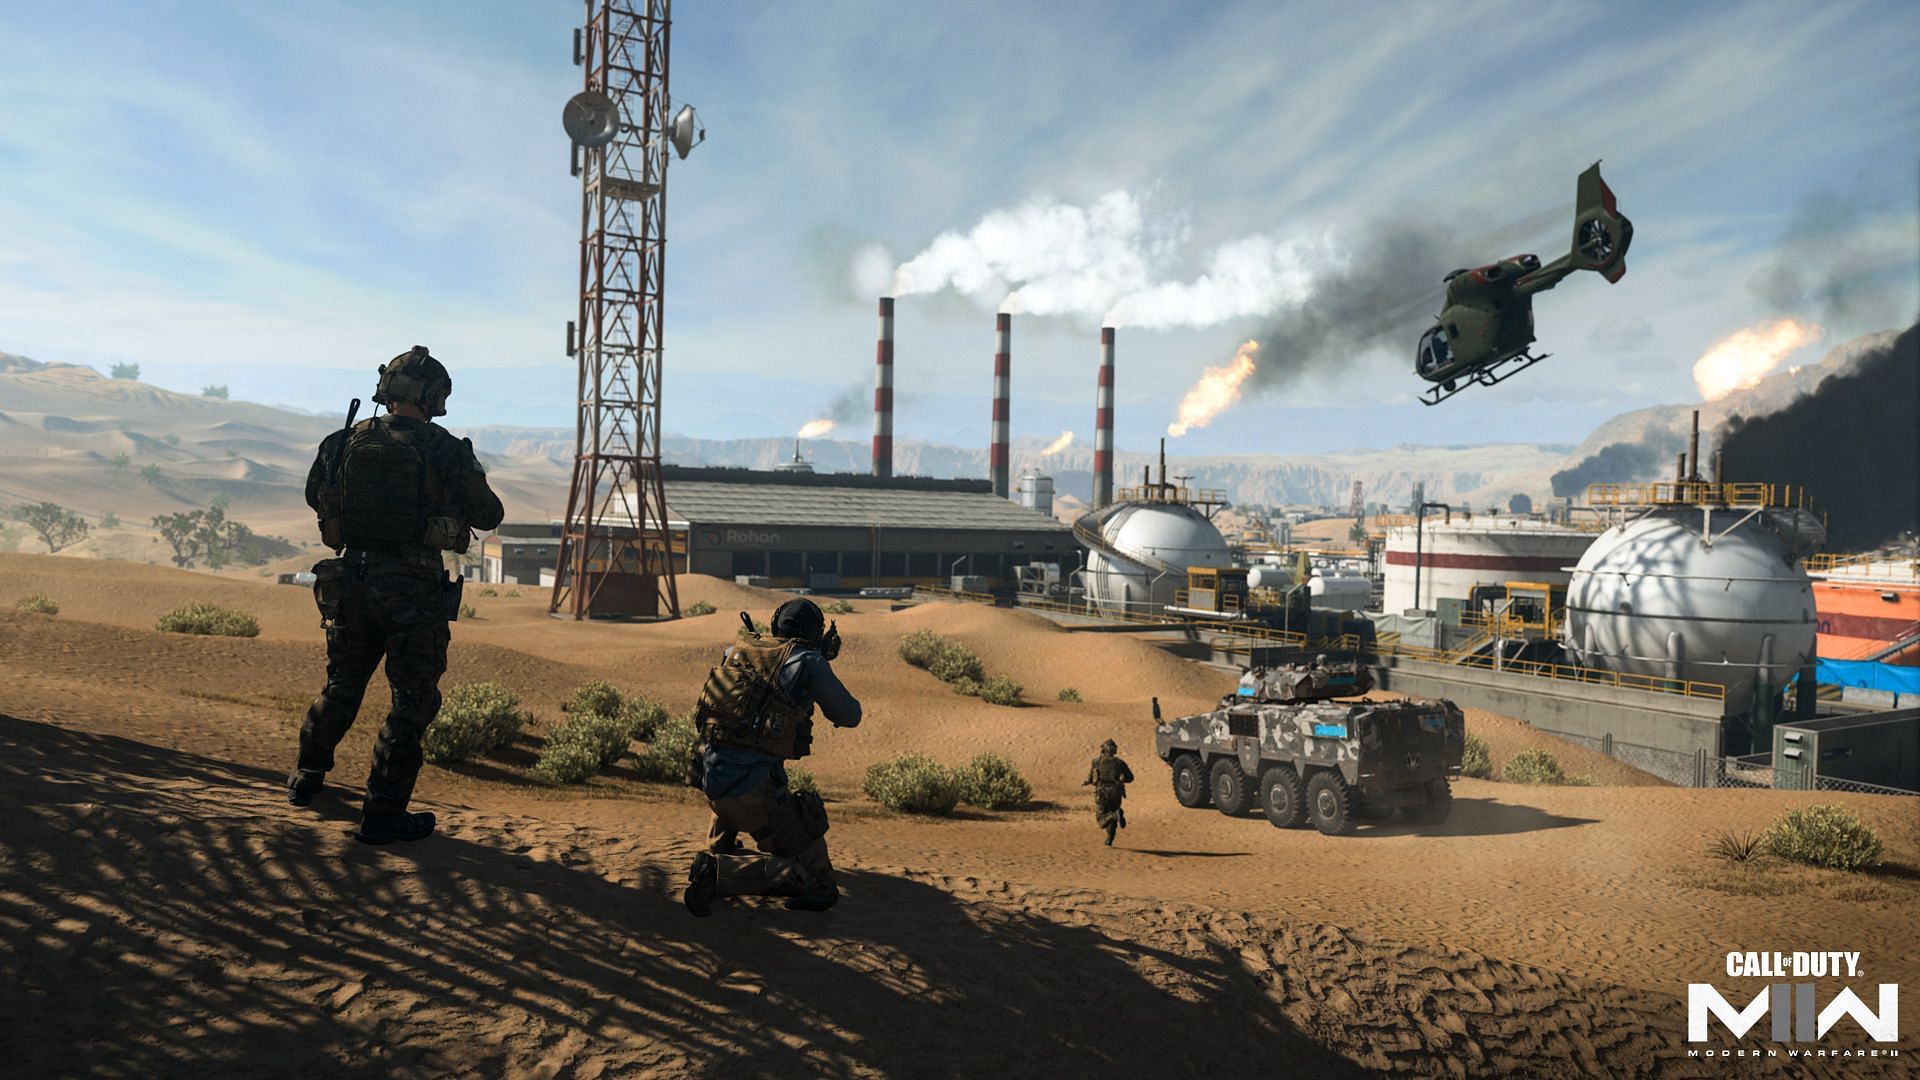 Call of Duty: Modern Warfare 3 Can Be a Classic Comeback Story for